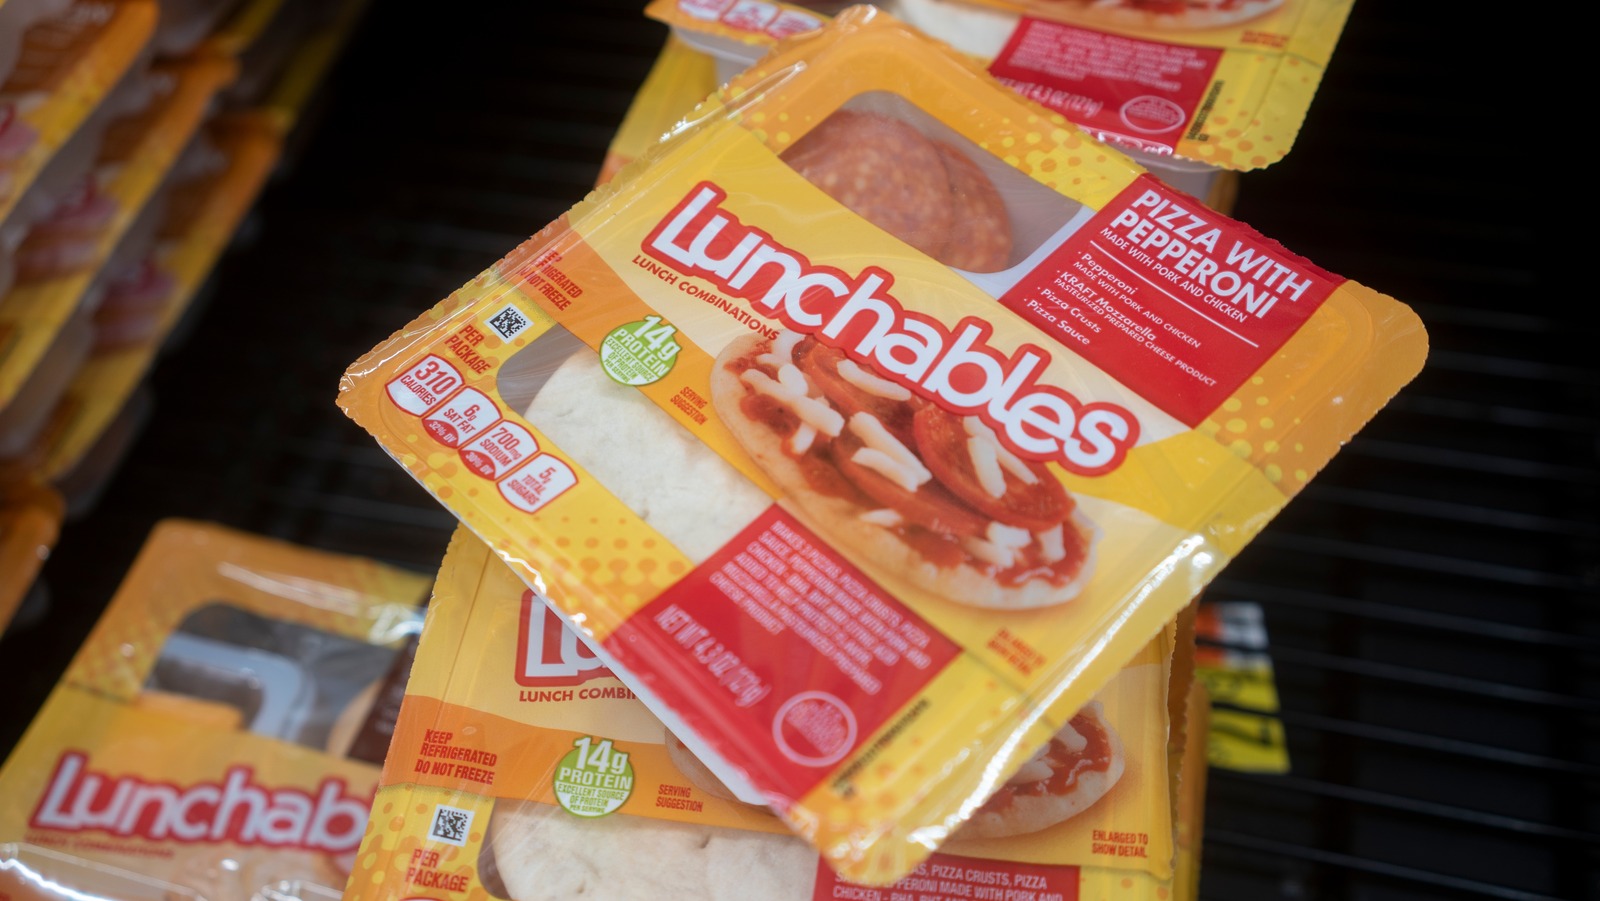 If You Love Lunchables, You'll Love this Cold Pizza Restaurant